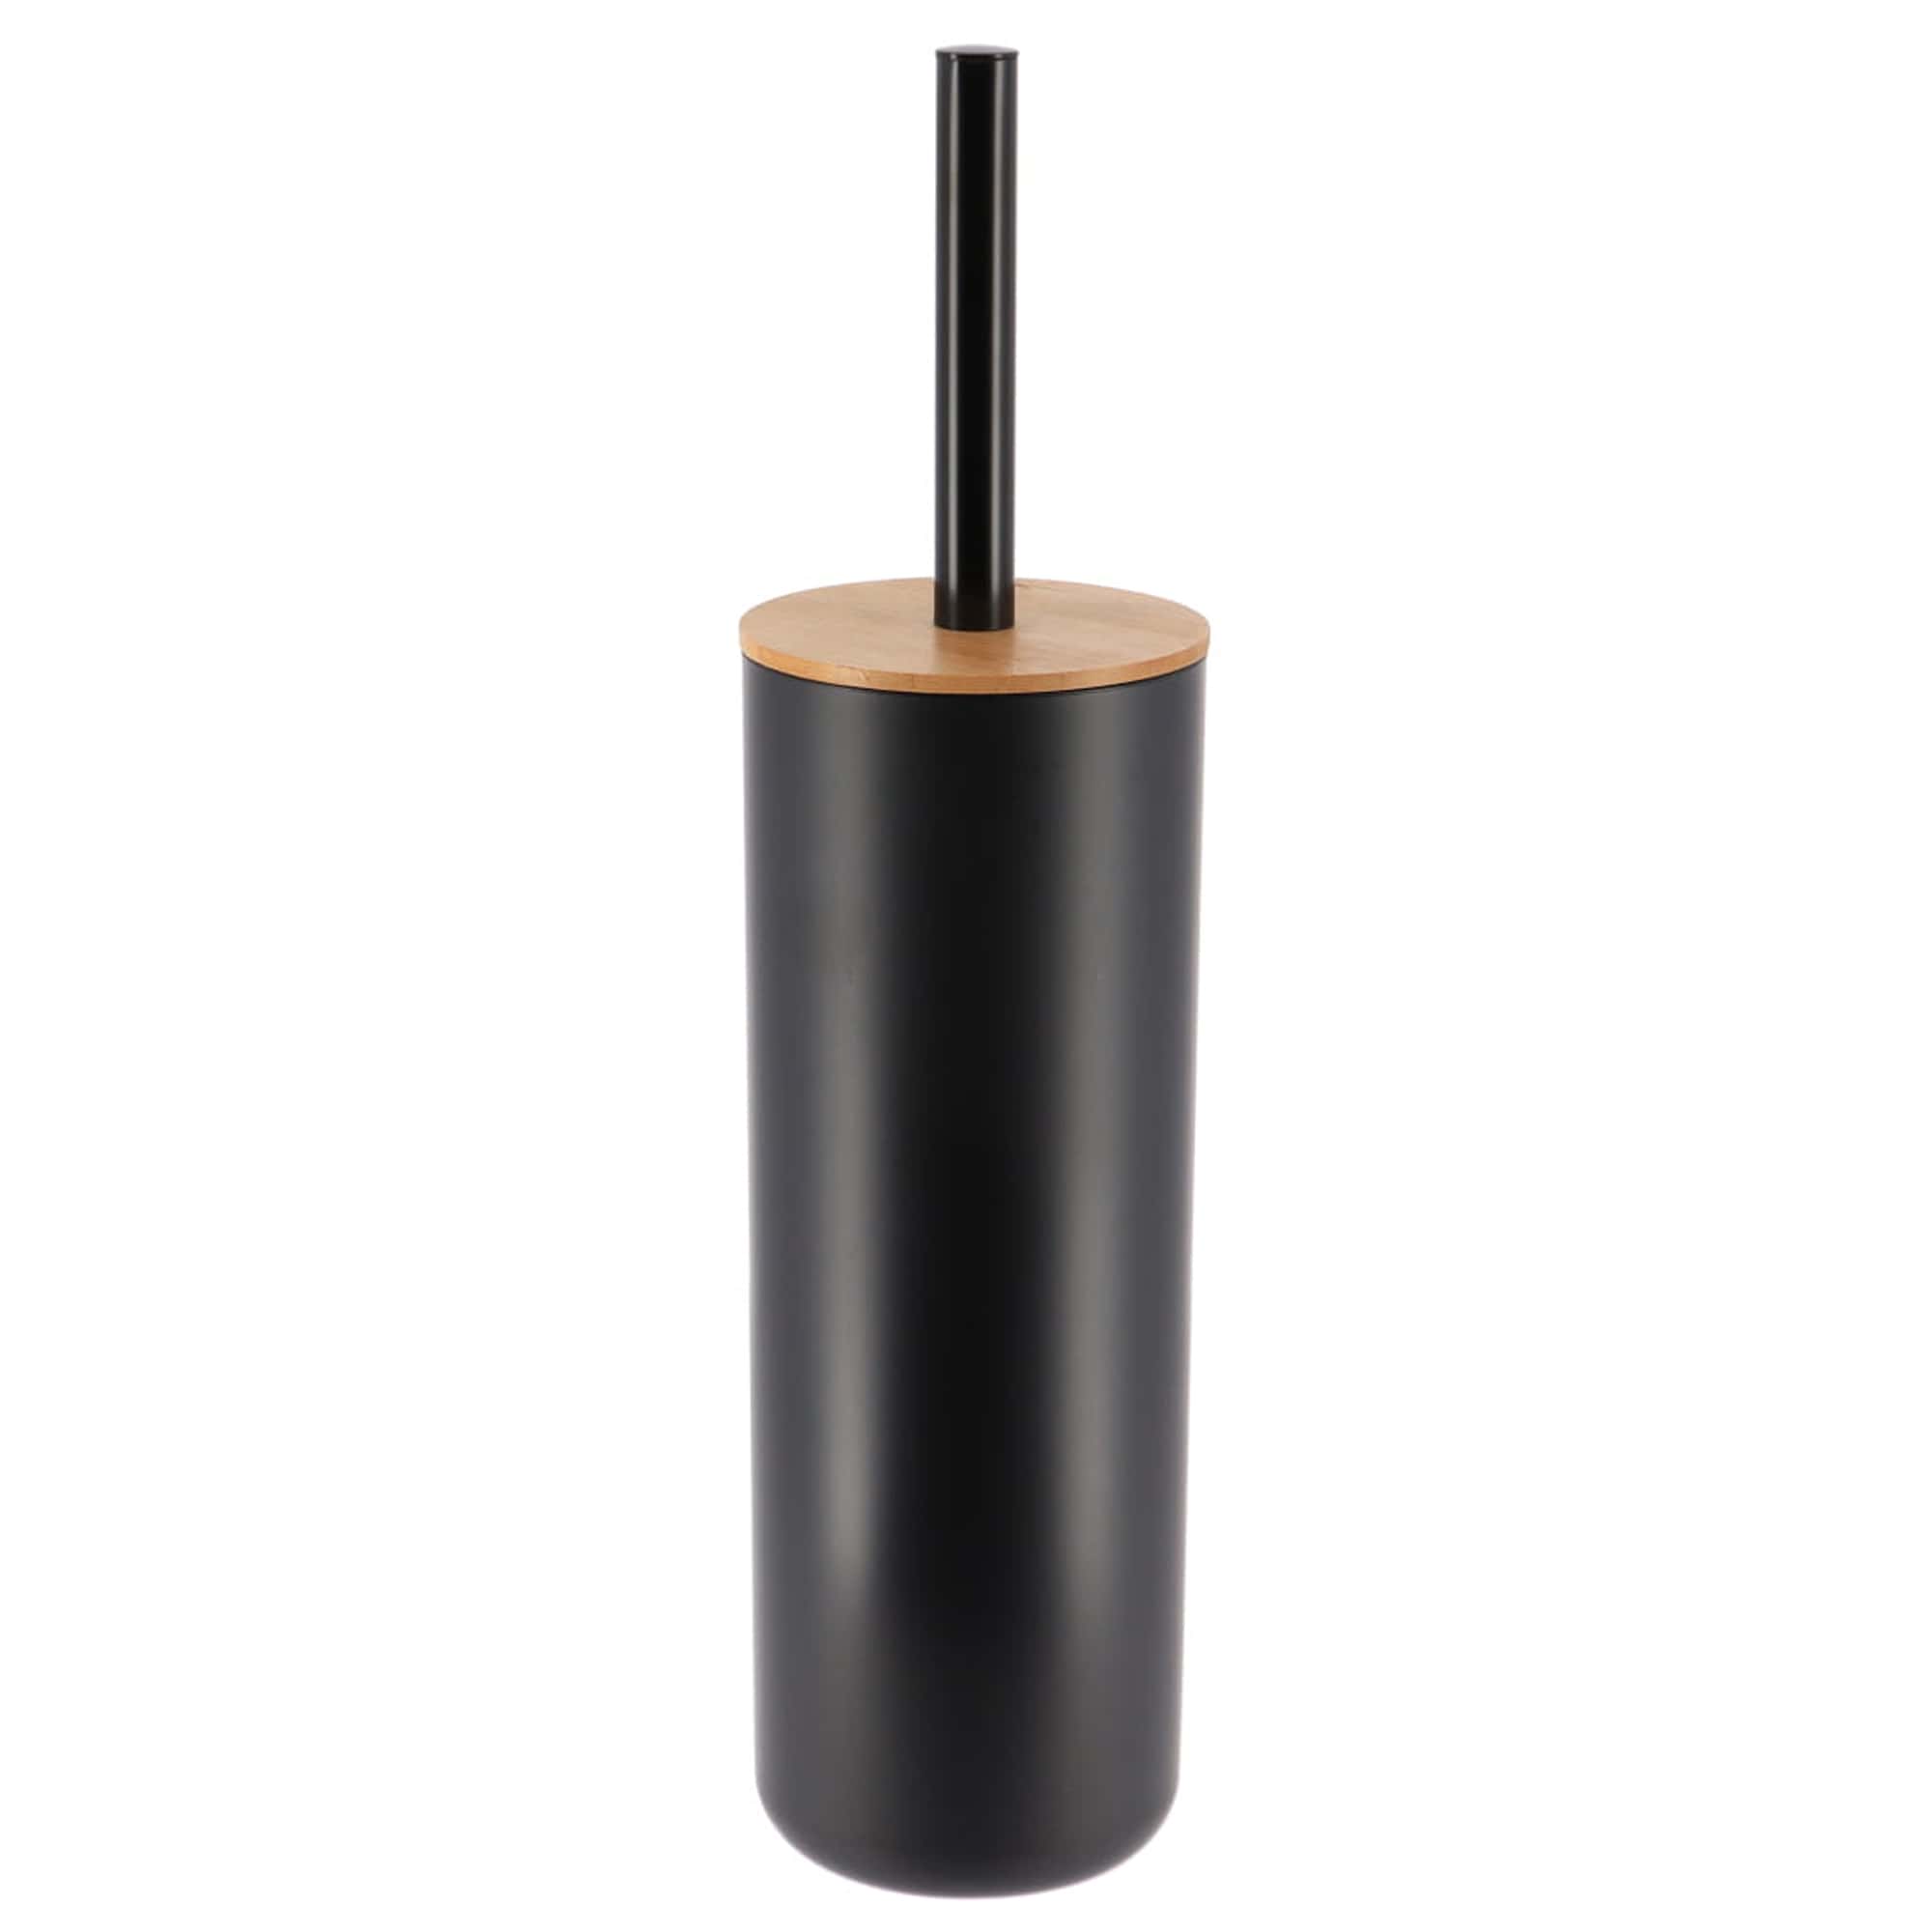 black and bamboo toilet brush and holder set